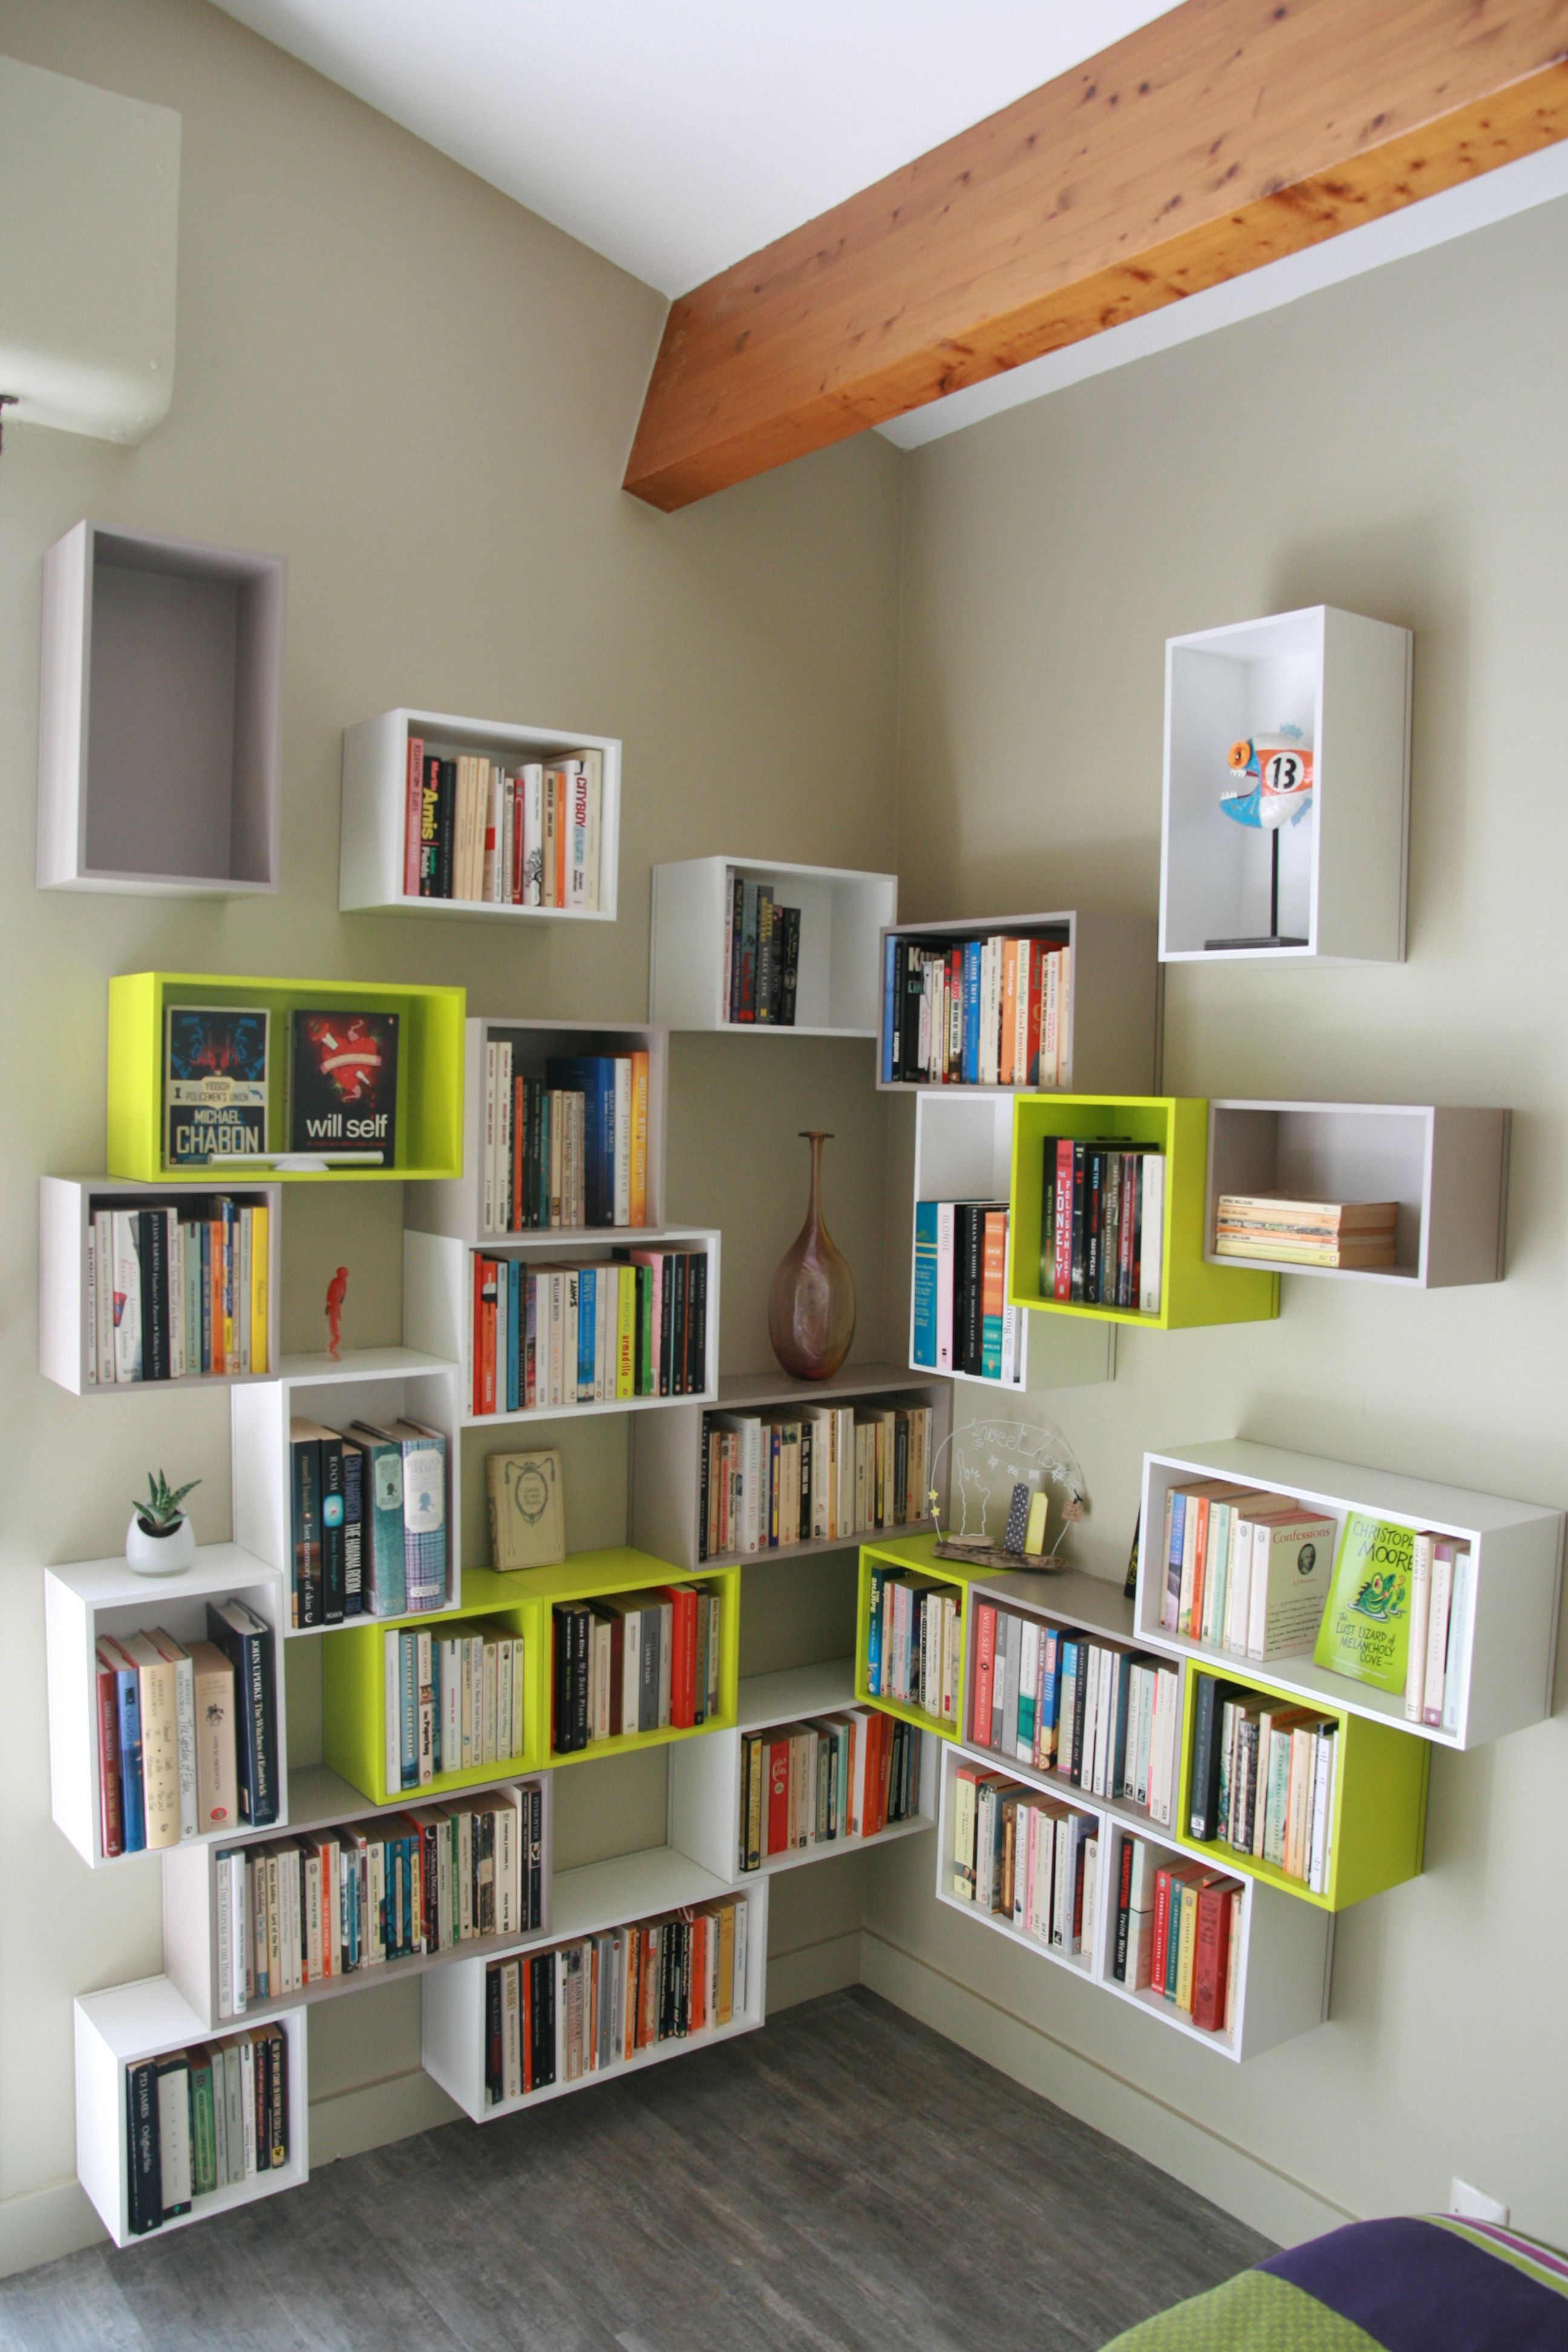 decorative shelves, white yellow boxes in the corner